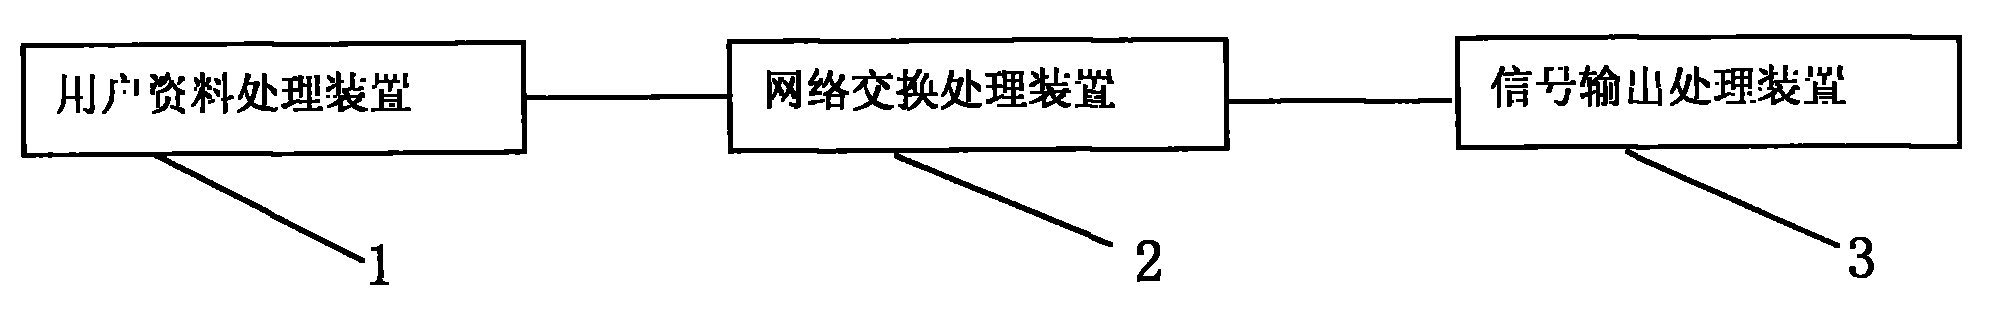 Telecommunication service generating method for automatic timing service